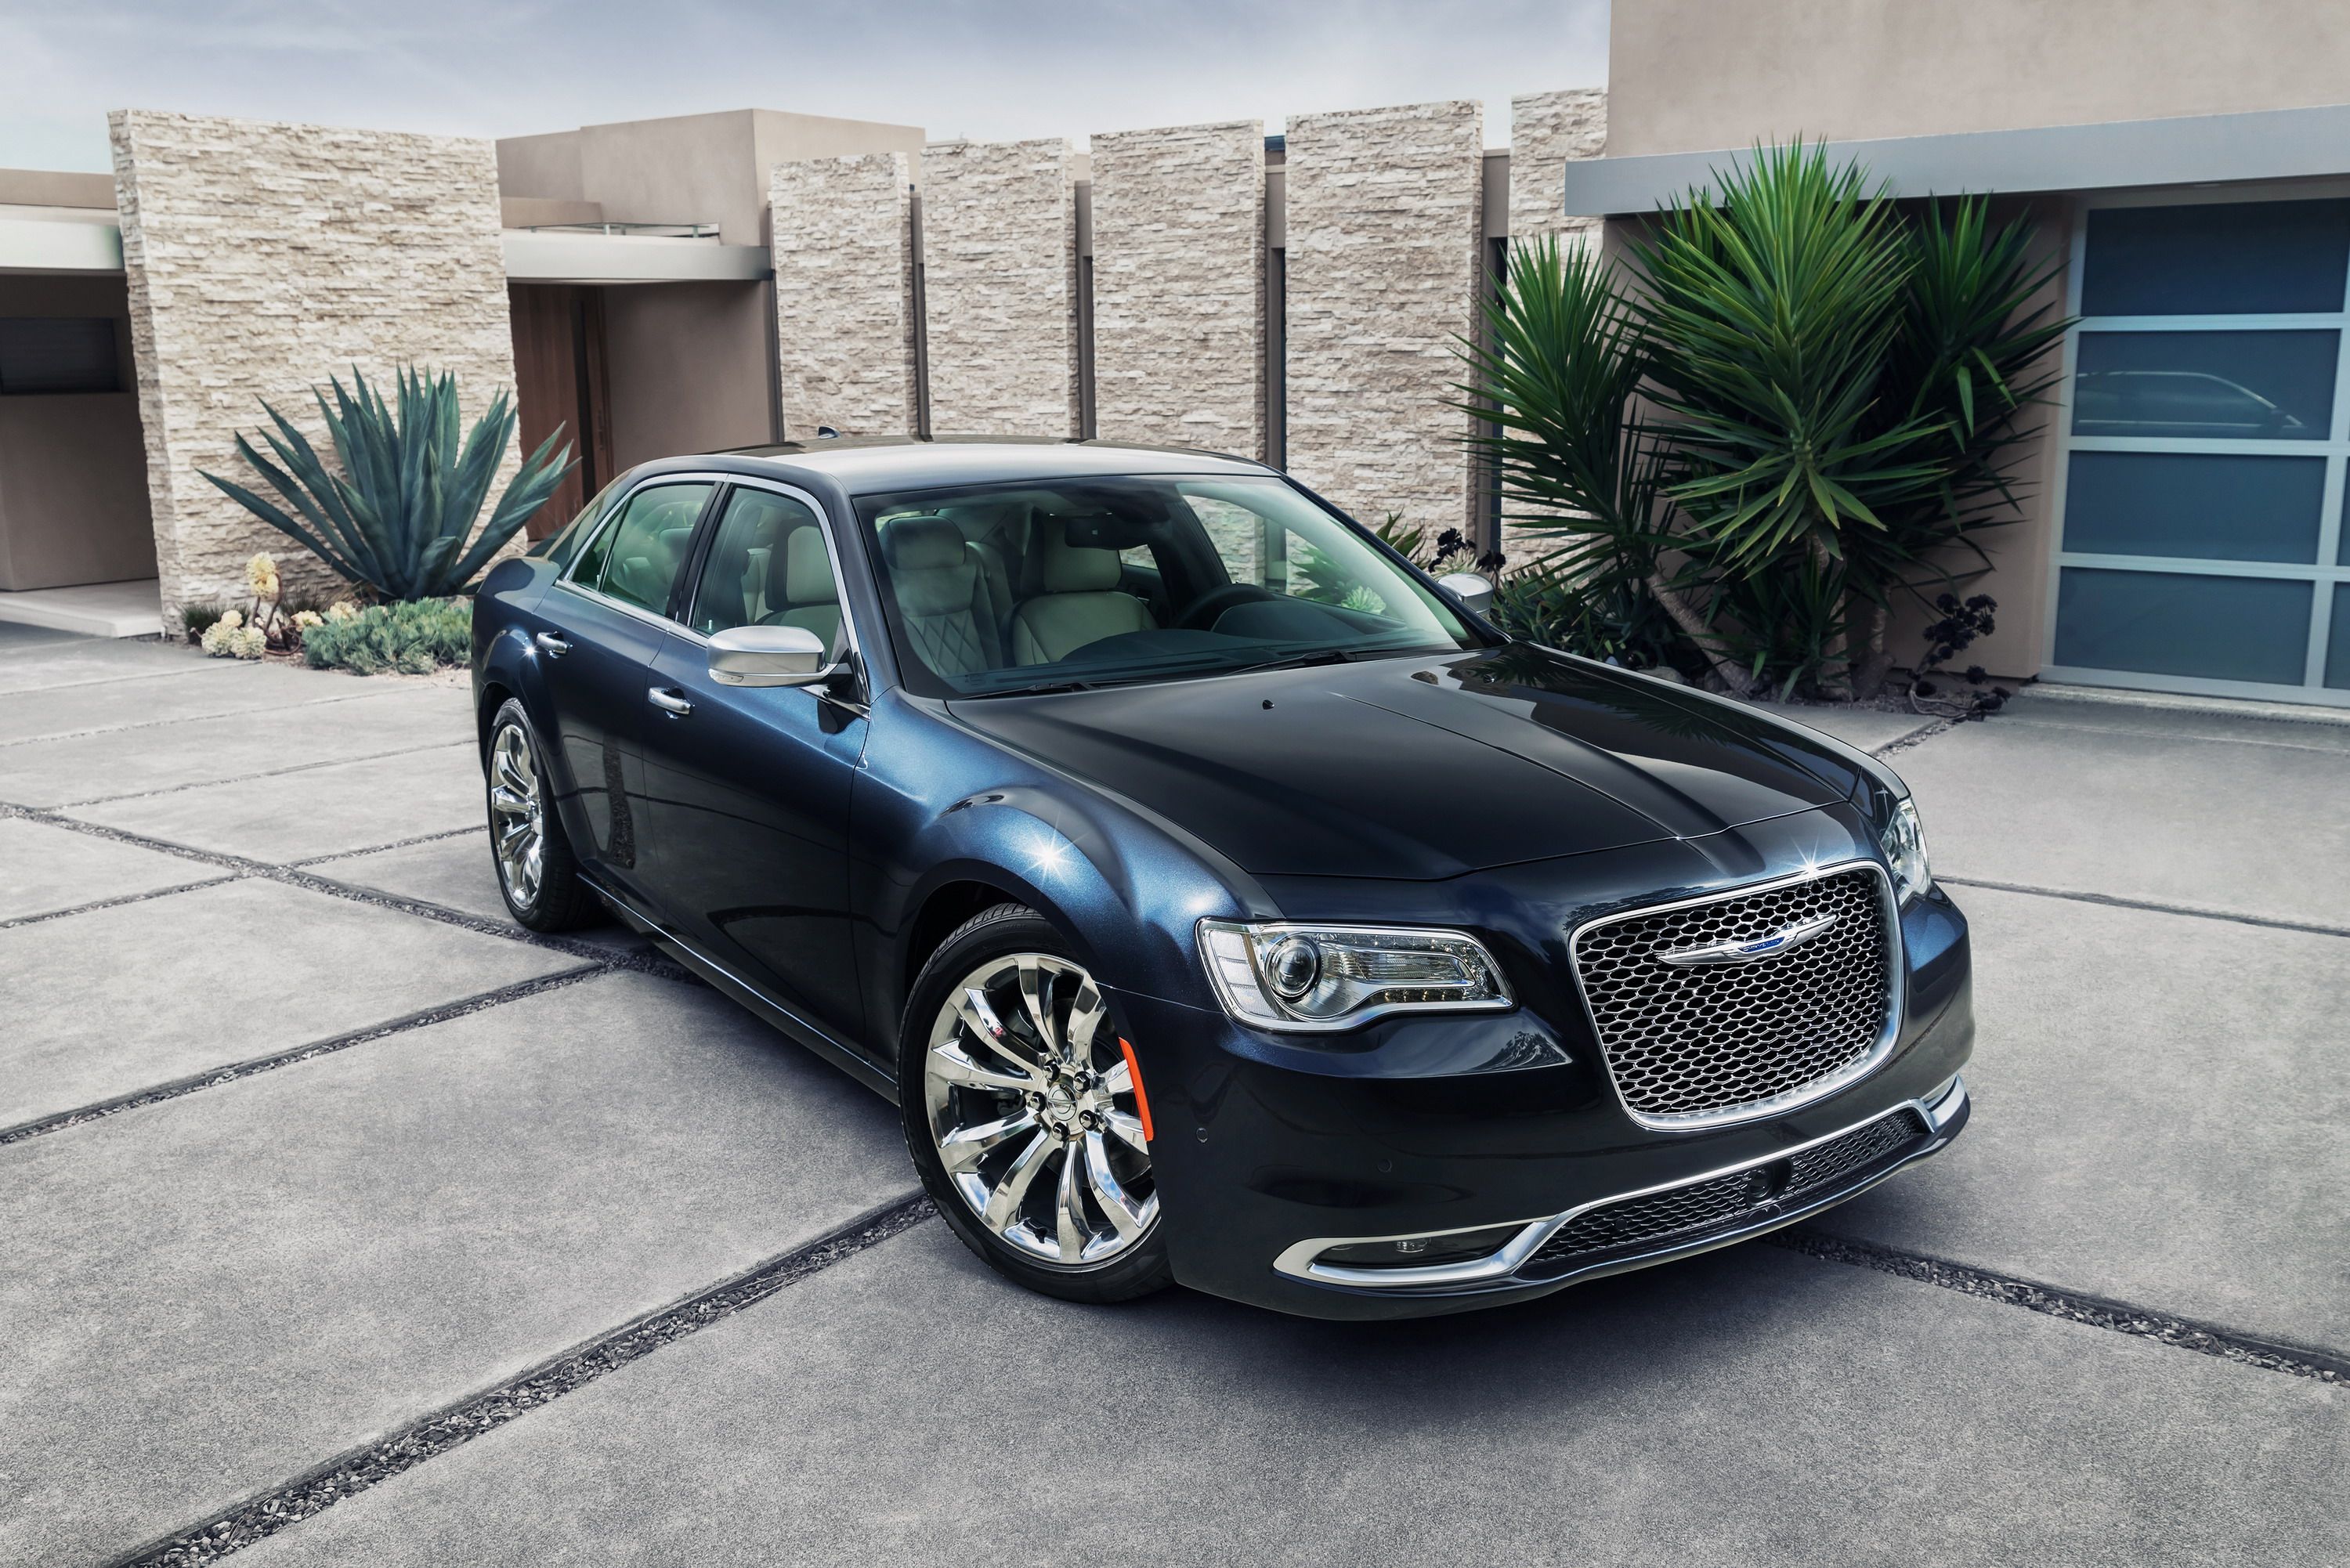 2017 Australia Could Get Its Very Own Hellcat Version Of The Chrysler 300